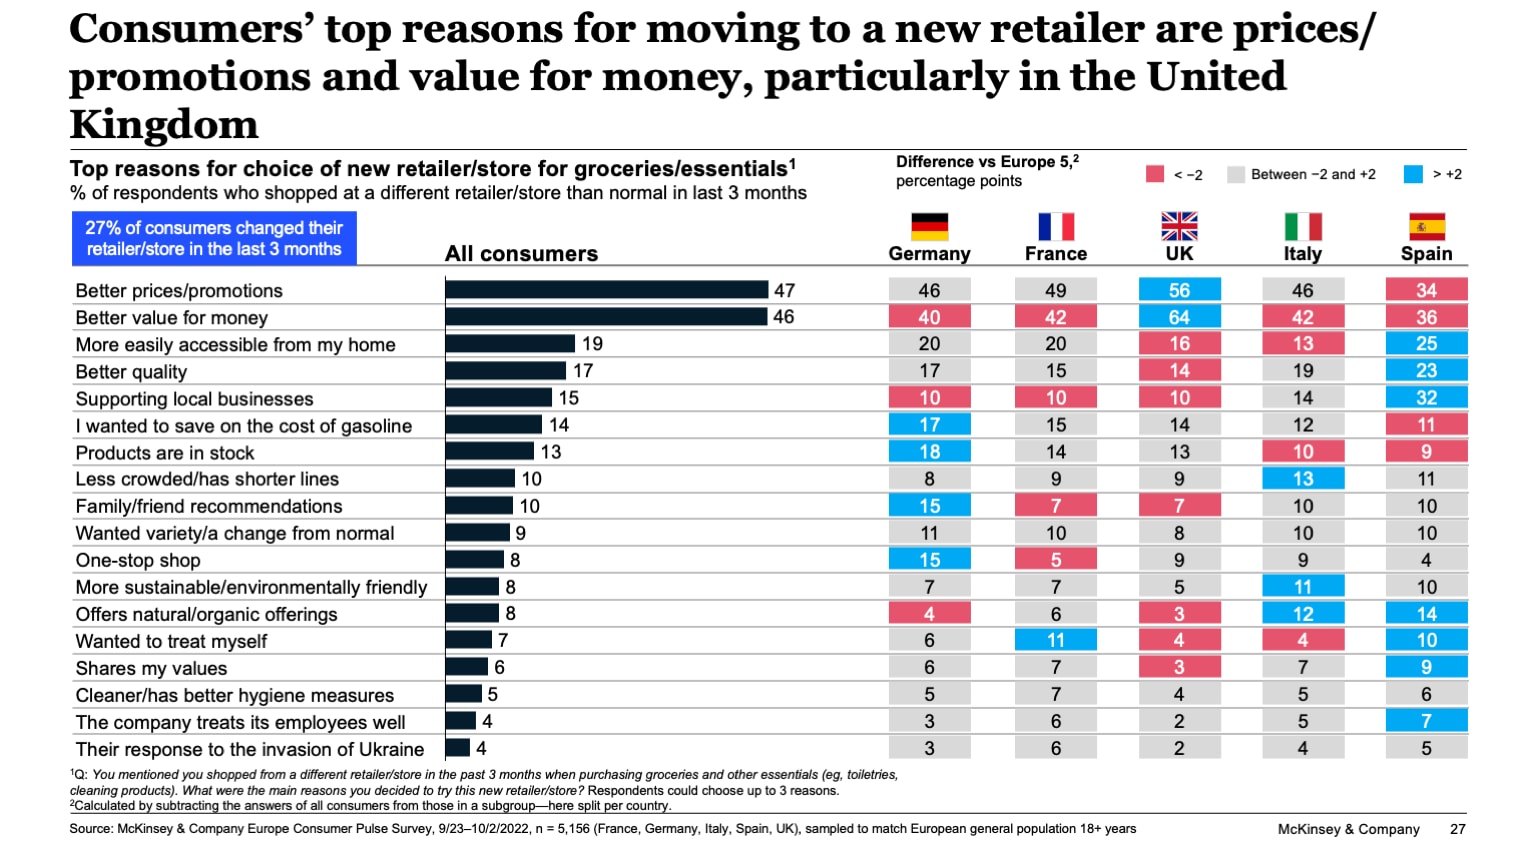 Consumers’ top reasons for moving to a new retailer are prices/promotions and value for money, particularly in the United Kingdom